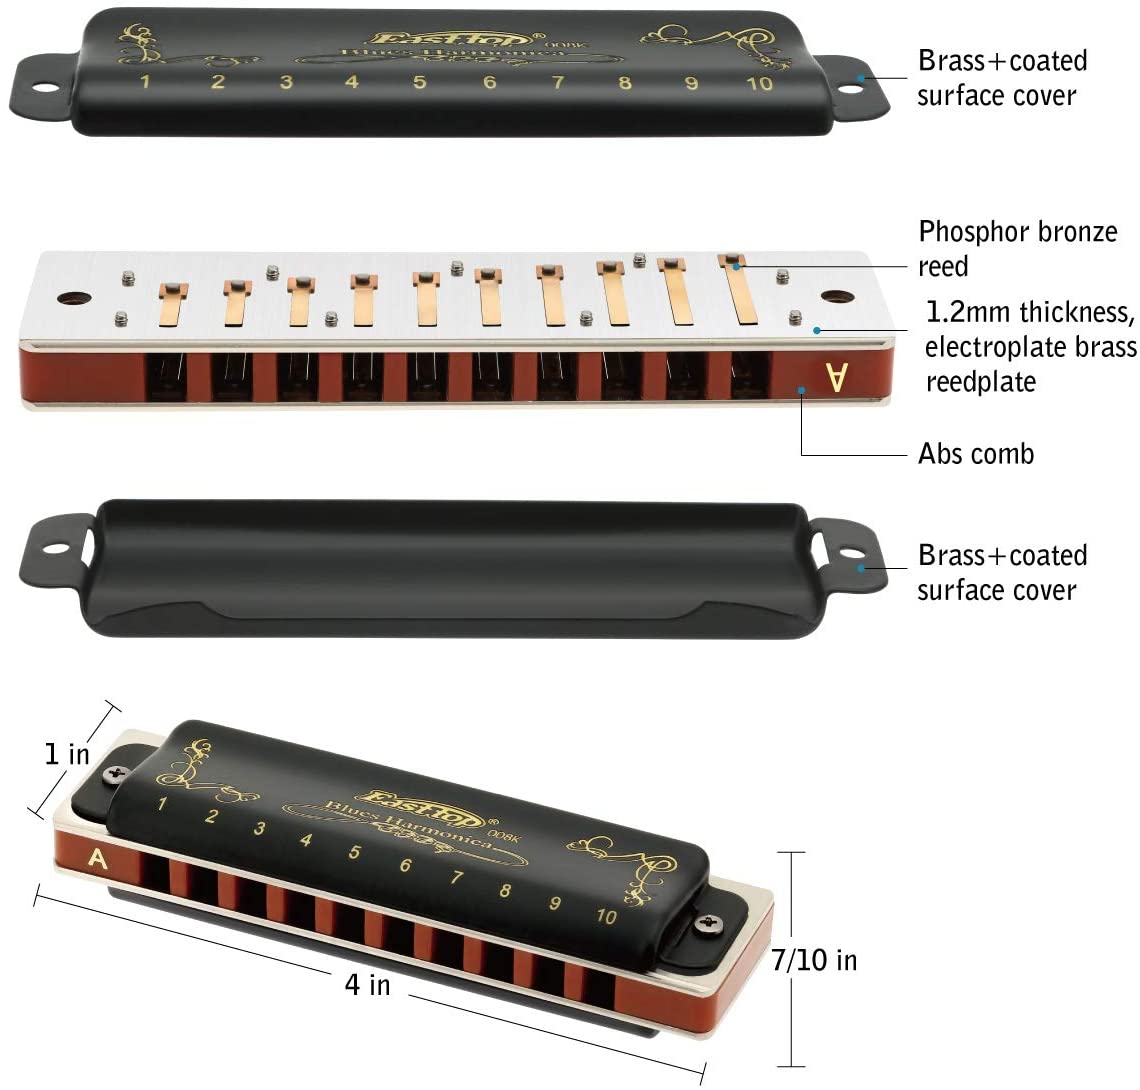 East top 10 Holes 20 Tones 008K Blues Professional Diatonic Blues Harmonica key of Paddy C, Harmonica for Adults, Professional Player and Students - Easttop harmonica store